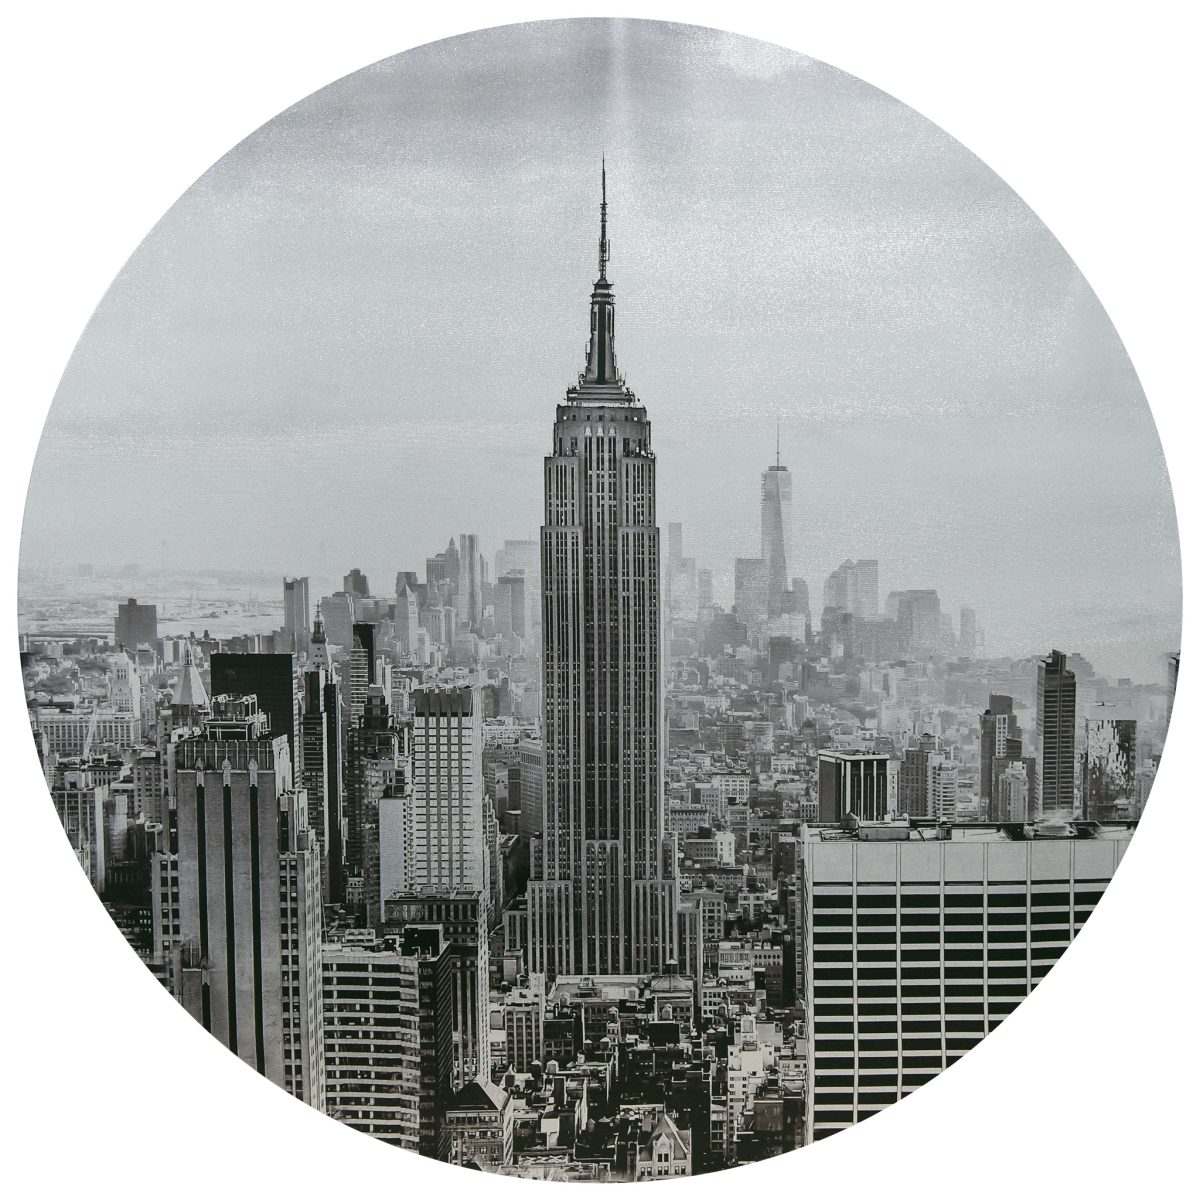 Scgr-ead0627-32 32 In. Empire State Building Circular Silver Canvas Giclee Printed Wall Art